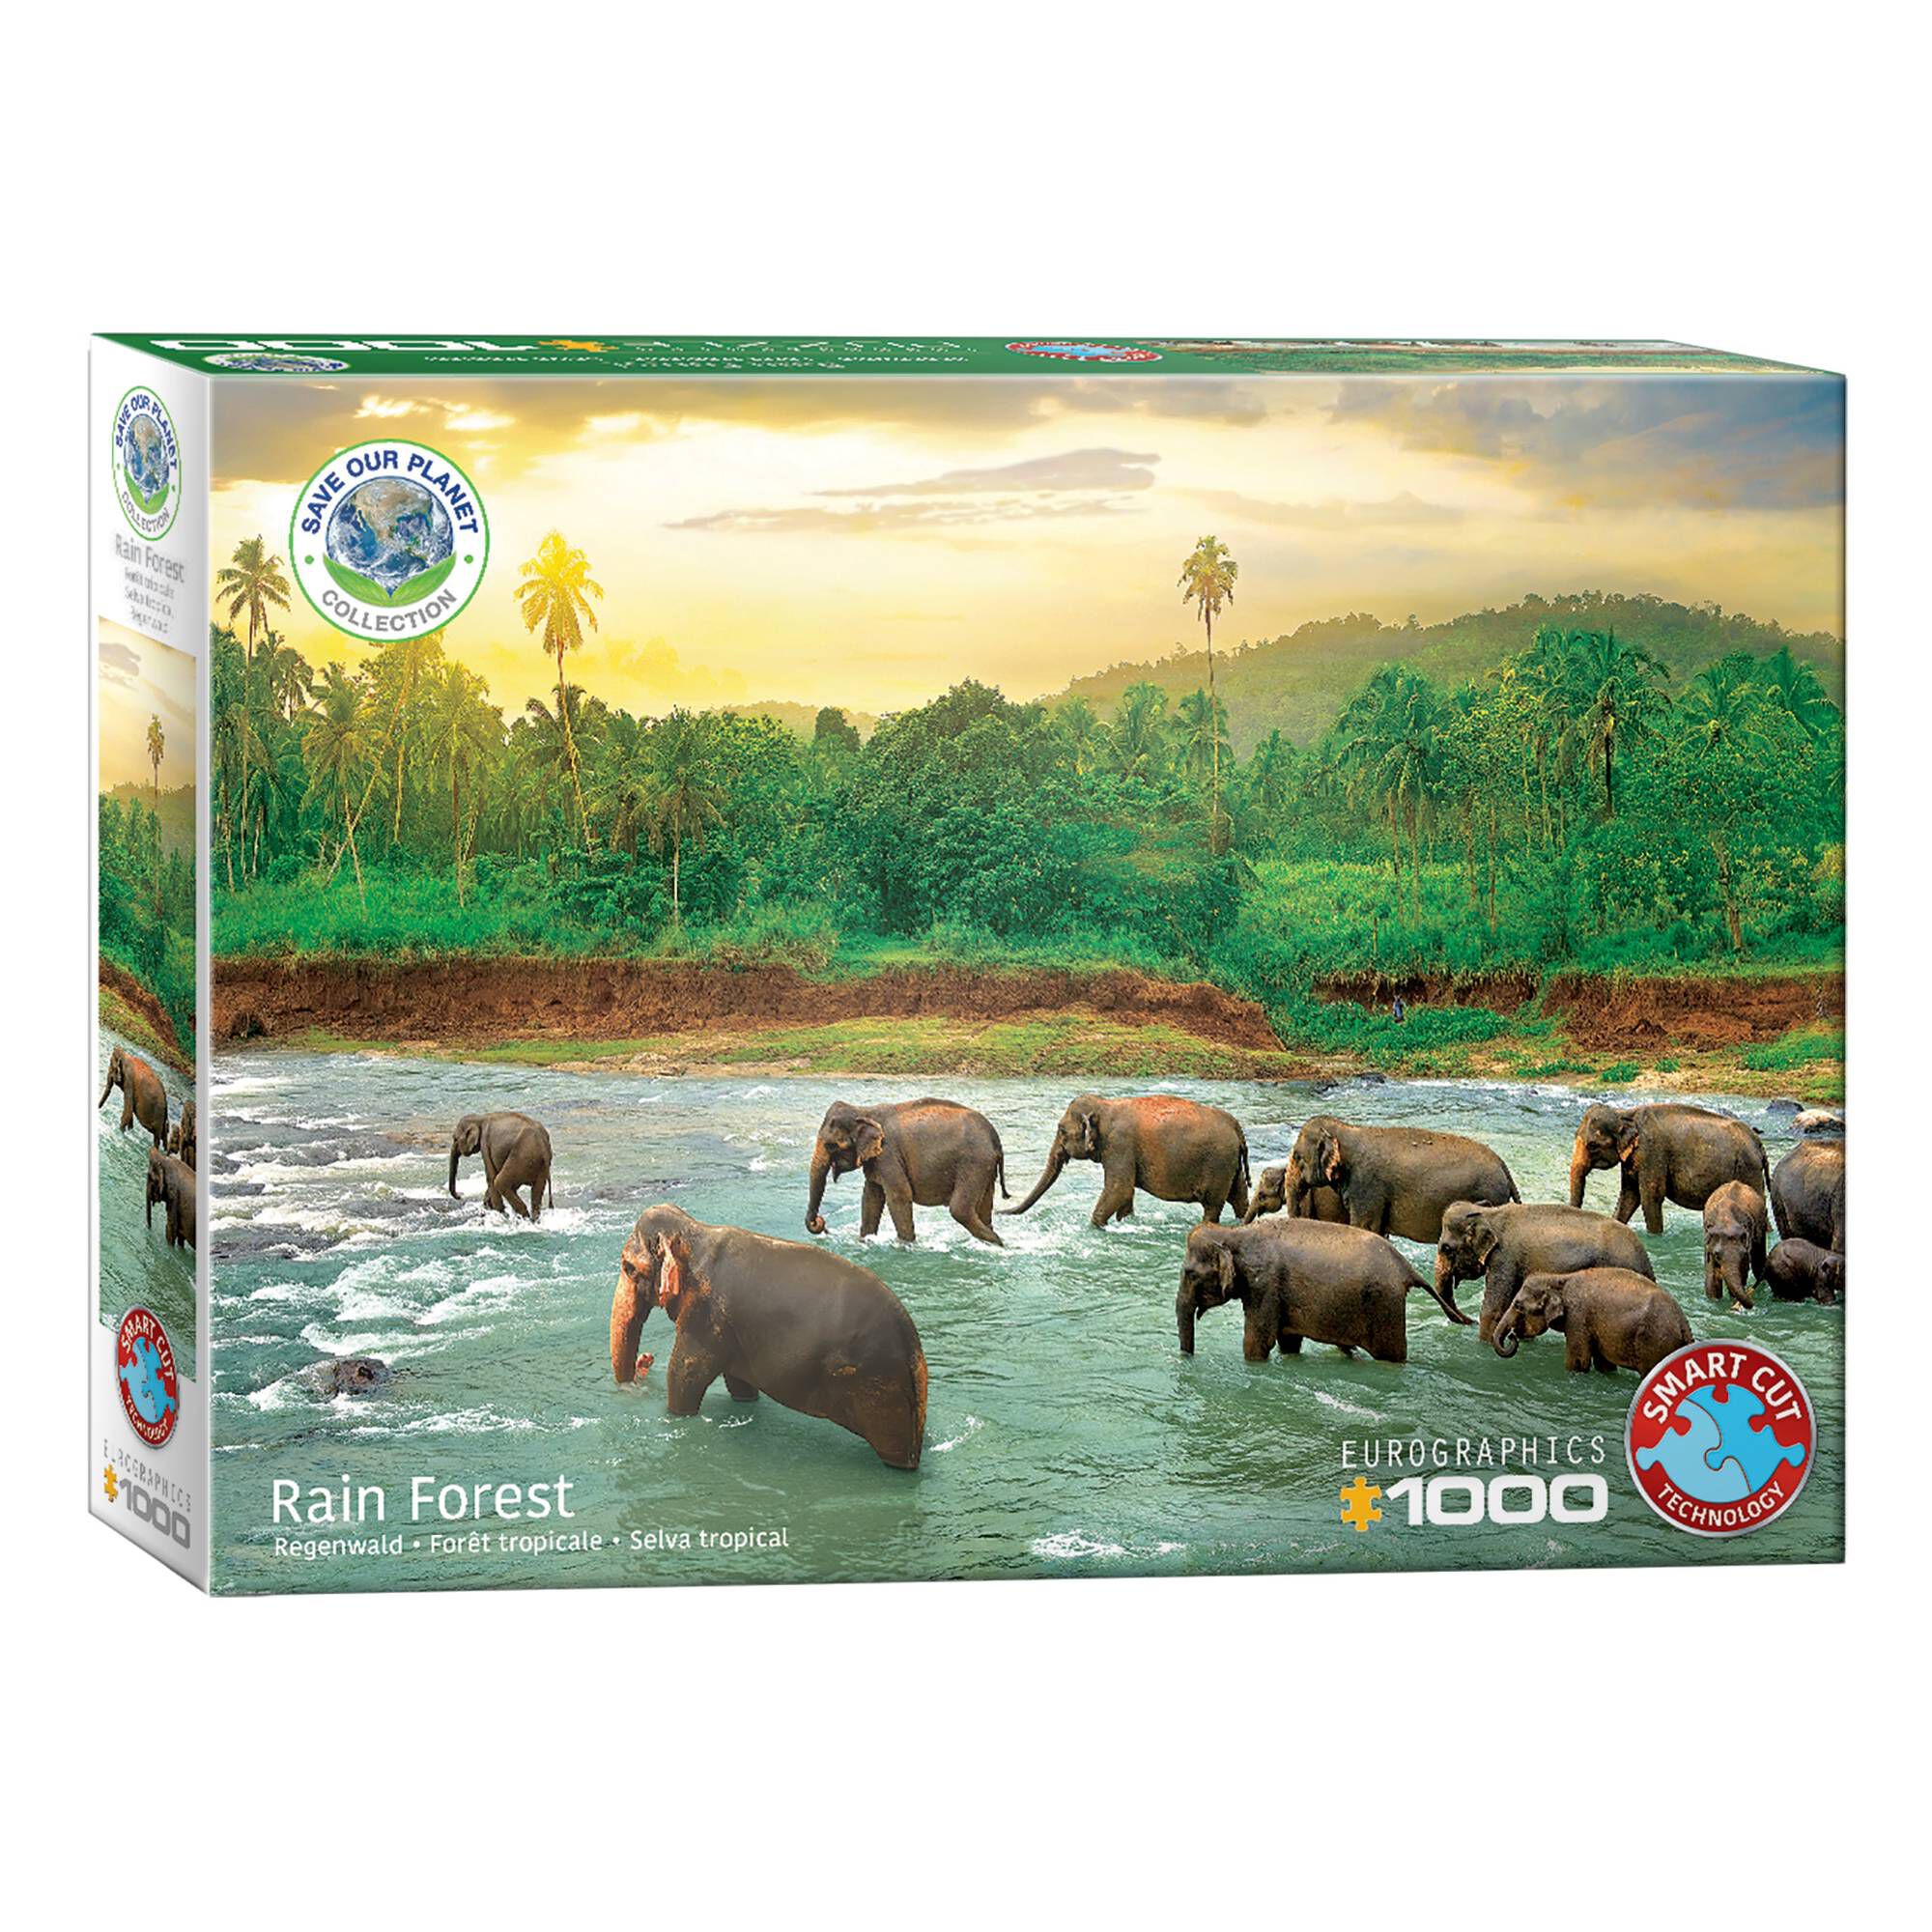 Eurographics Save Our Planet Rainforest Jigsaw Puzzle 1000 Pieces Hobbycraft 9457